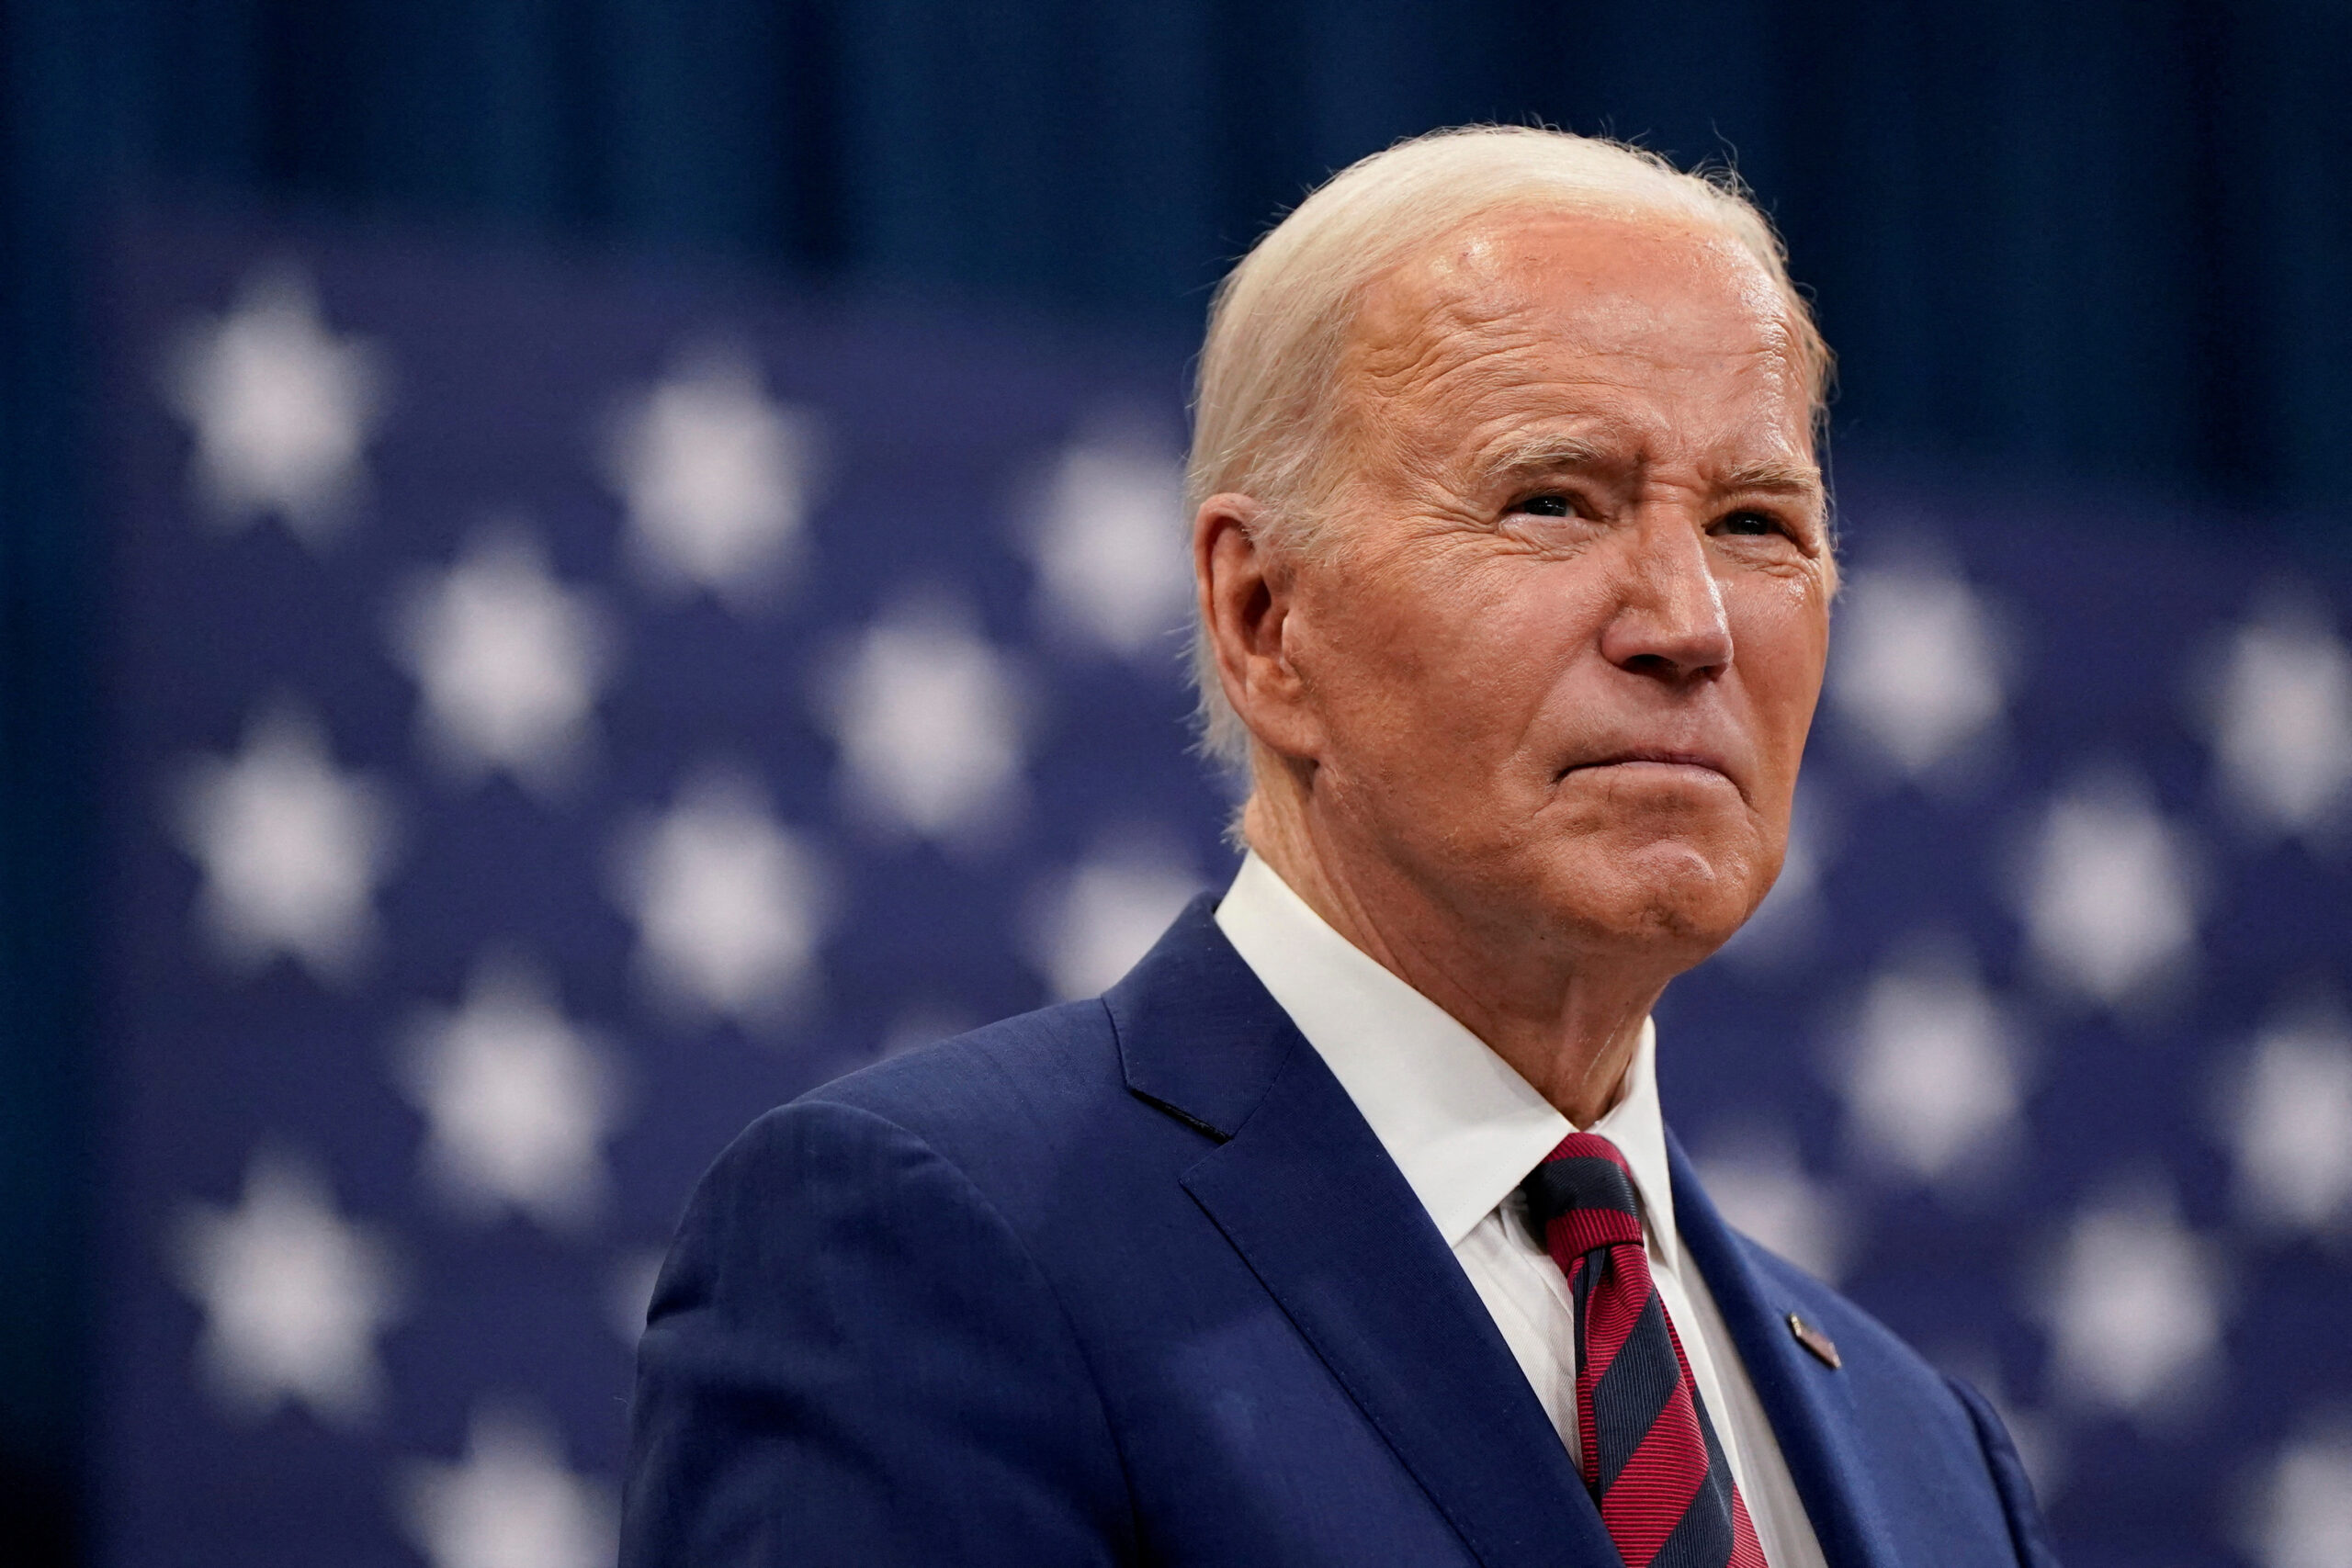 Biden Campaign Affirms Florida Remains 'In Play' Despite Contrary Statements